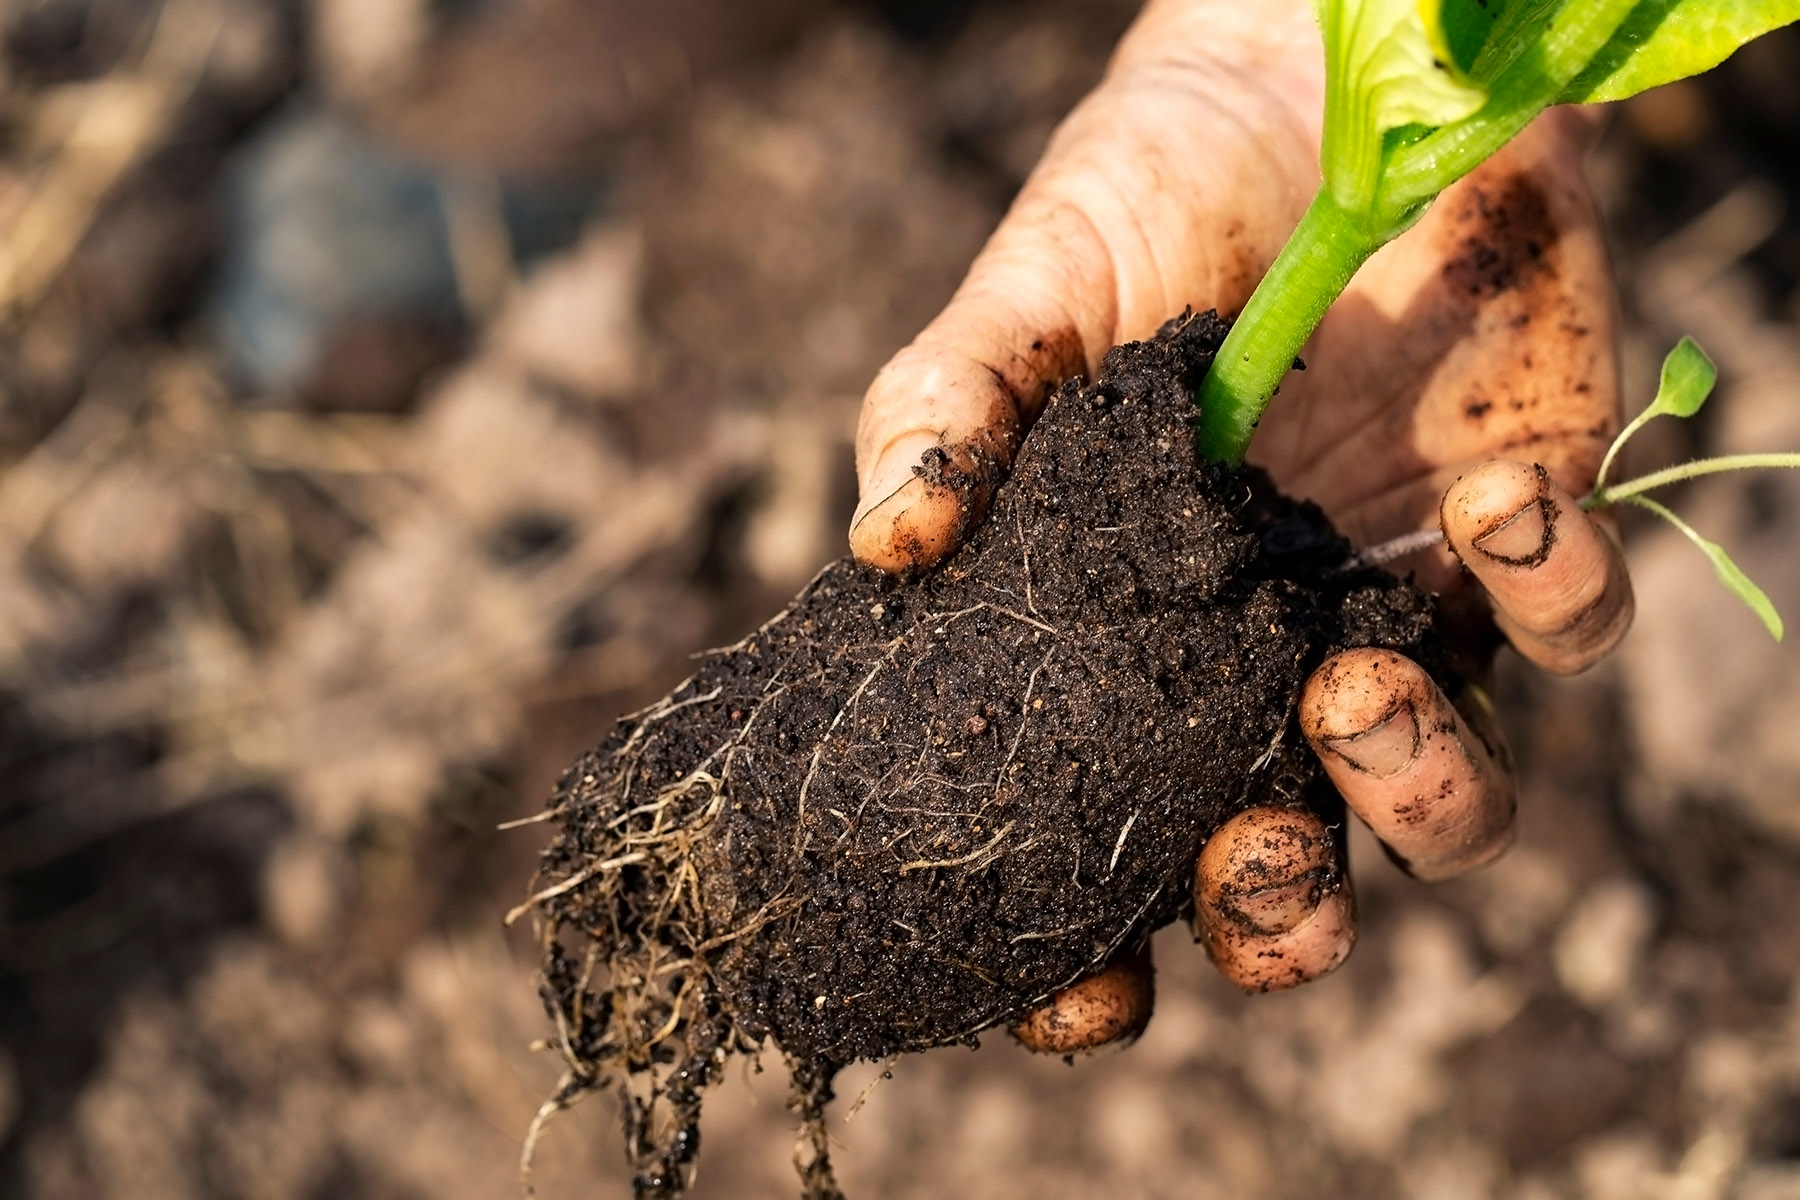 Healthy soil is important, but what does it look like?